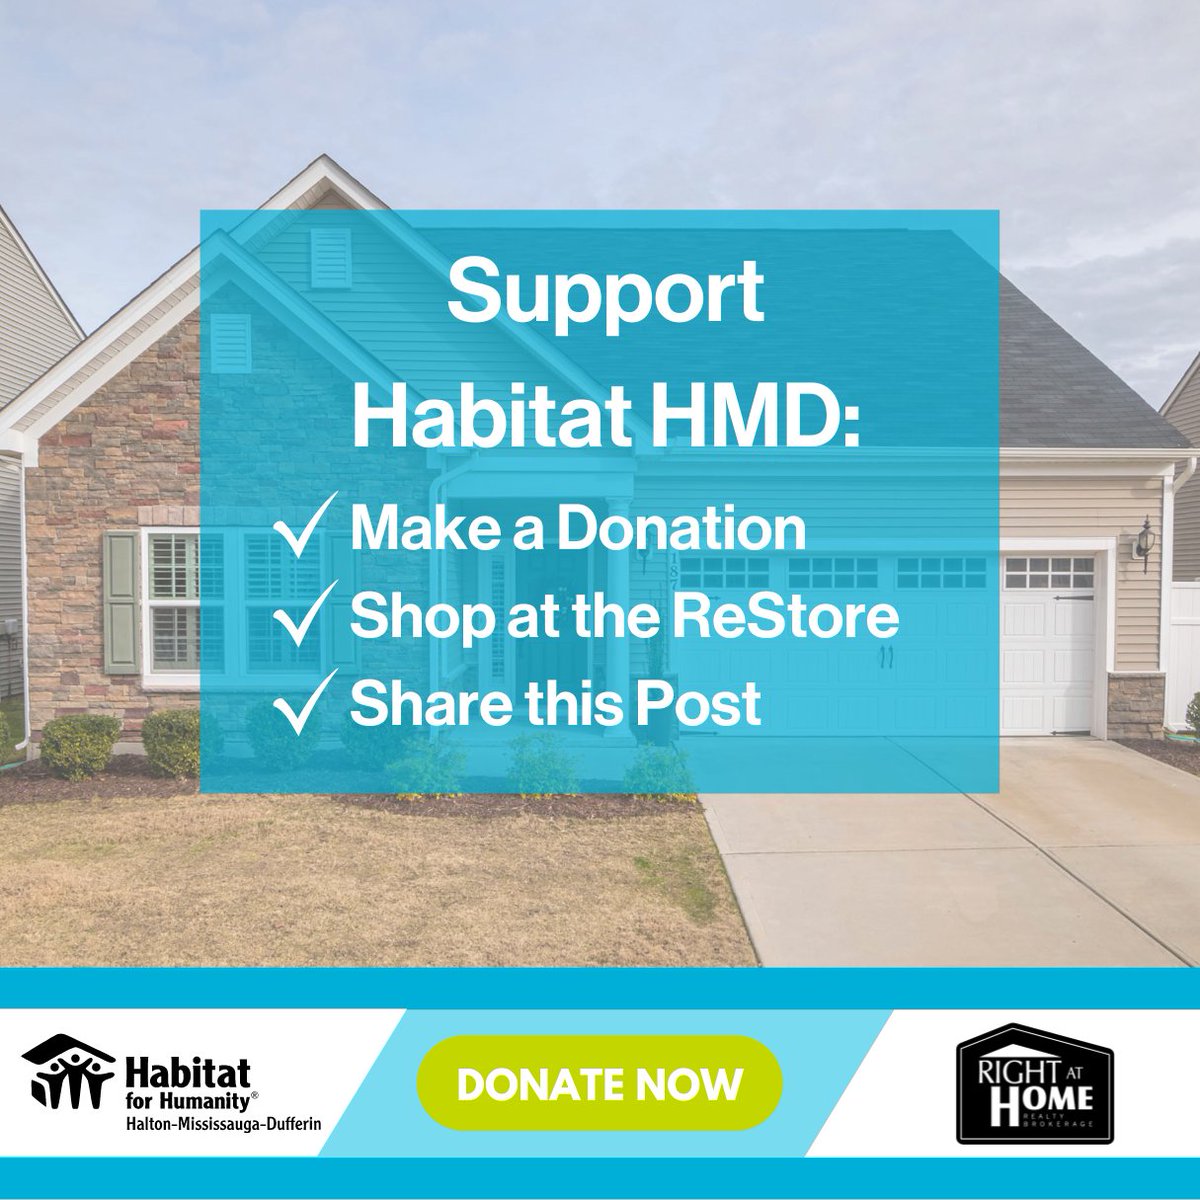 In Canada, one out of every five households faces challenges in finding affordable housing. Today, your donation holds twice the power to make a difference, thanks to the extraordinary generosity of our donor, Right At Home Realty! Donate today: habitathm.ca/donate